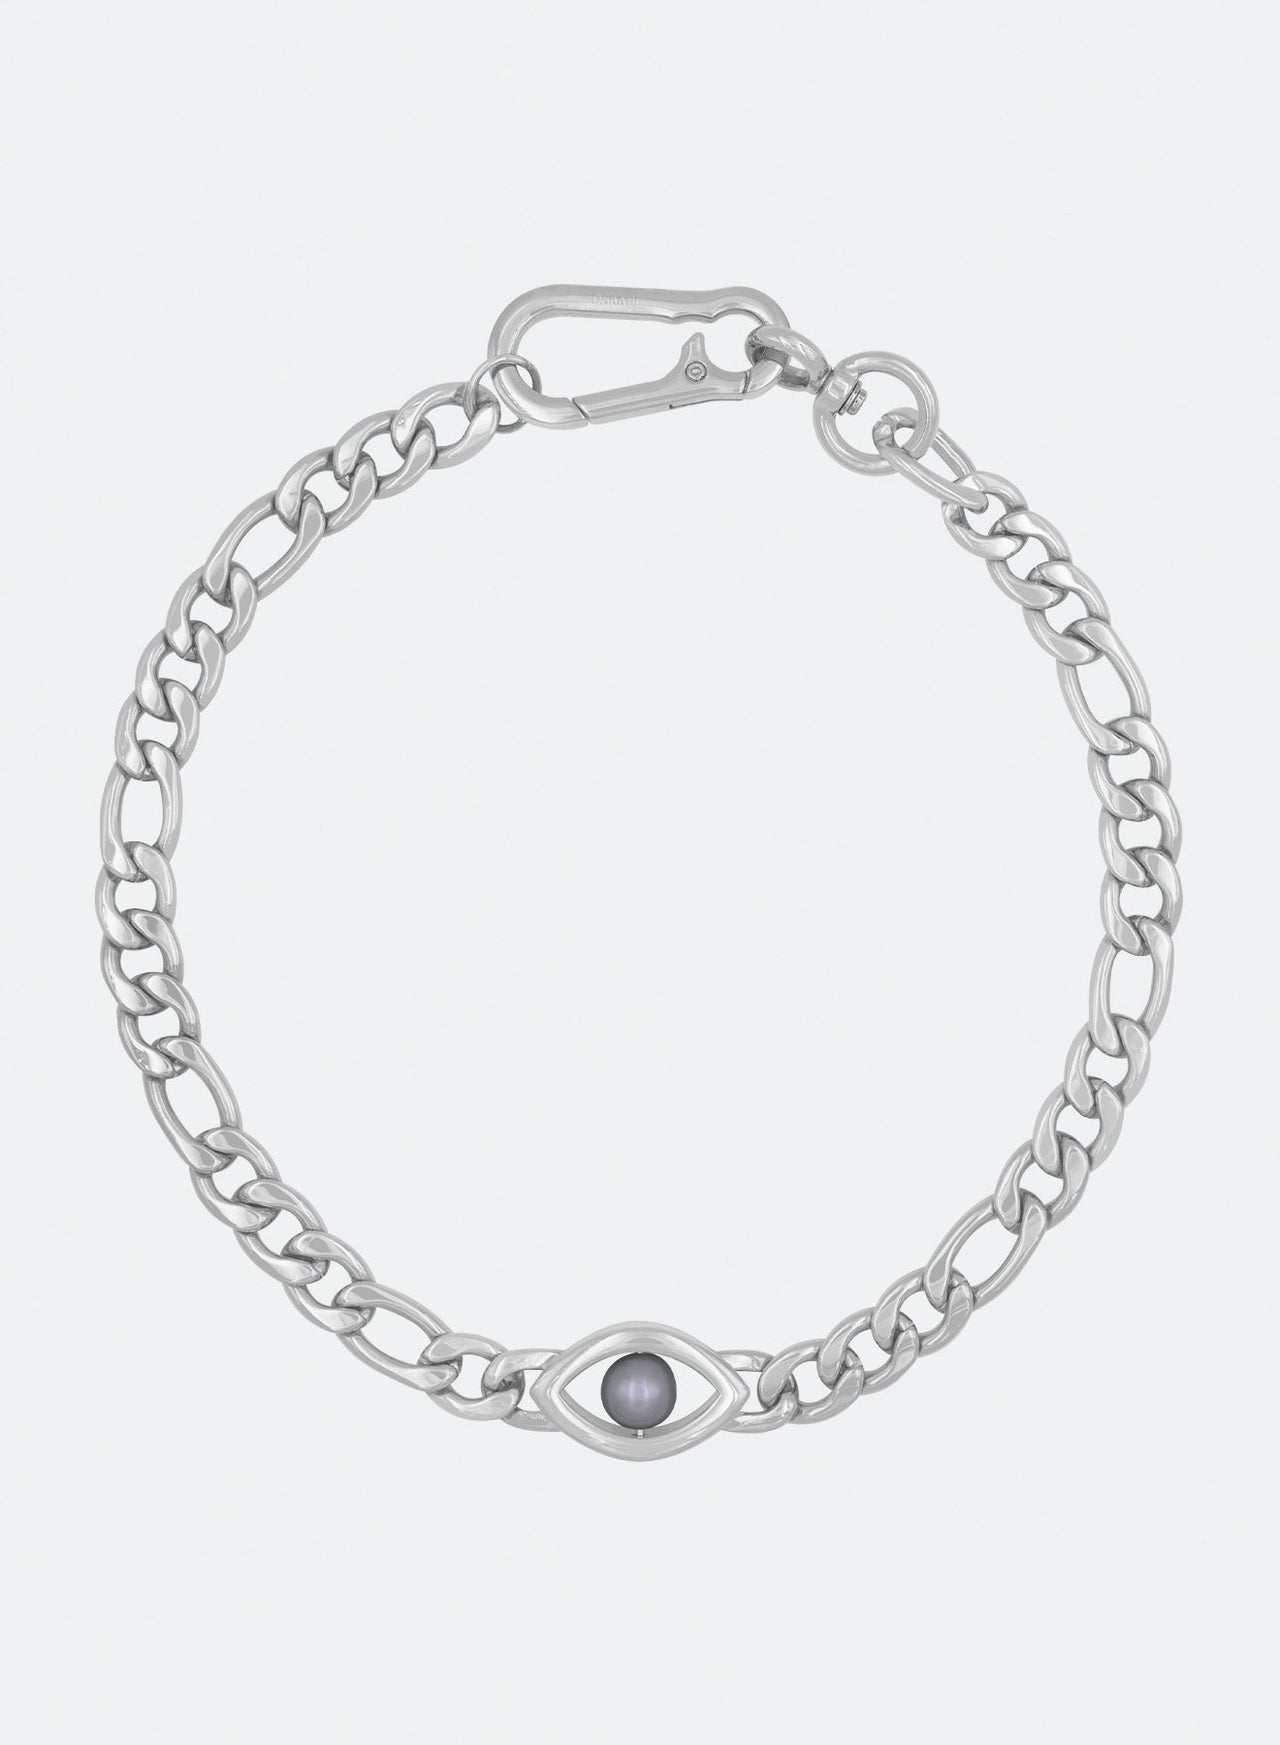 18k white gold coated figaro chain choker with central natural indonesian freshwater pearl in mabe grey and oversize carabiner clasp with lasered logo.